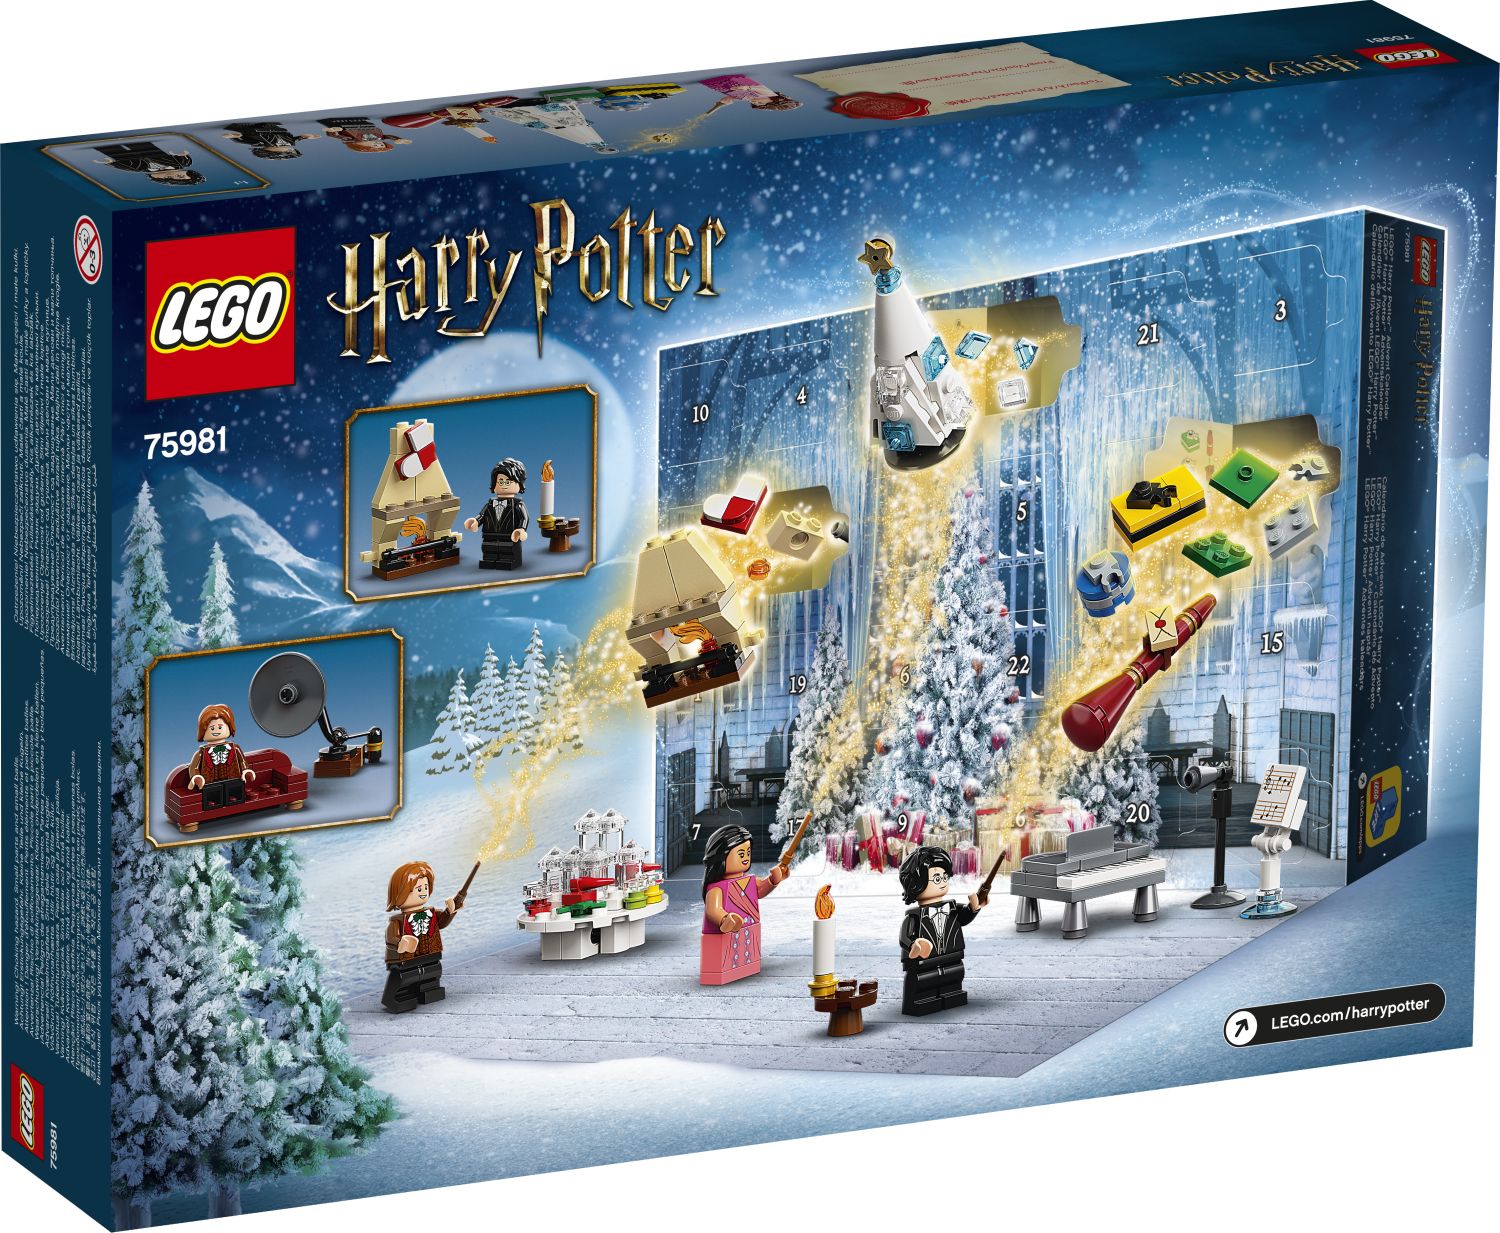 LEGO Harry Potter 2020 Advent Calendar (75981) Official Images The